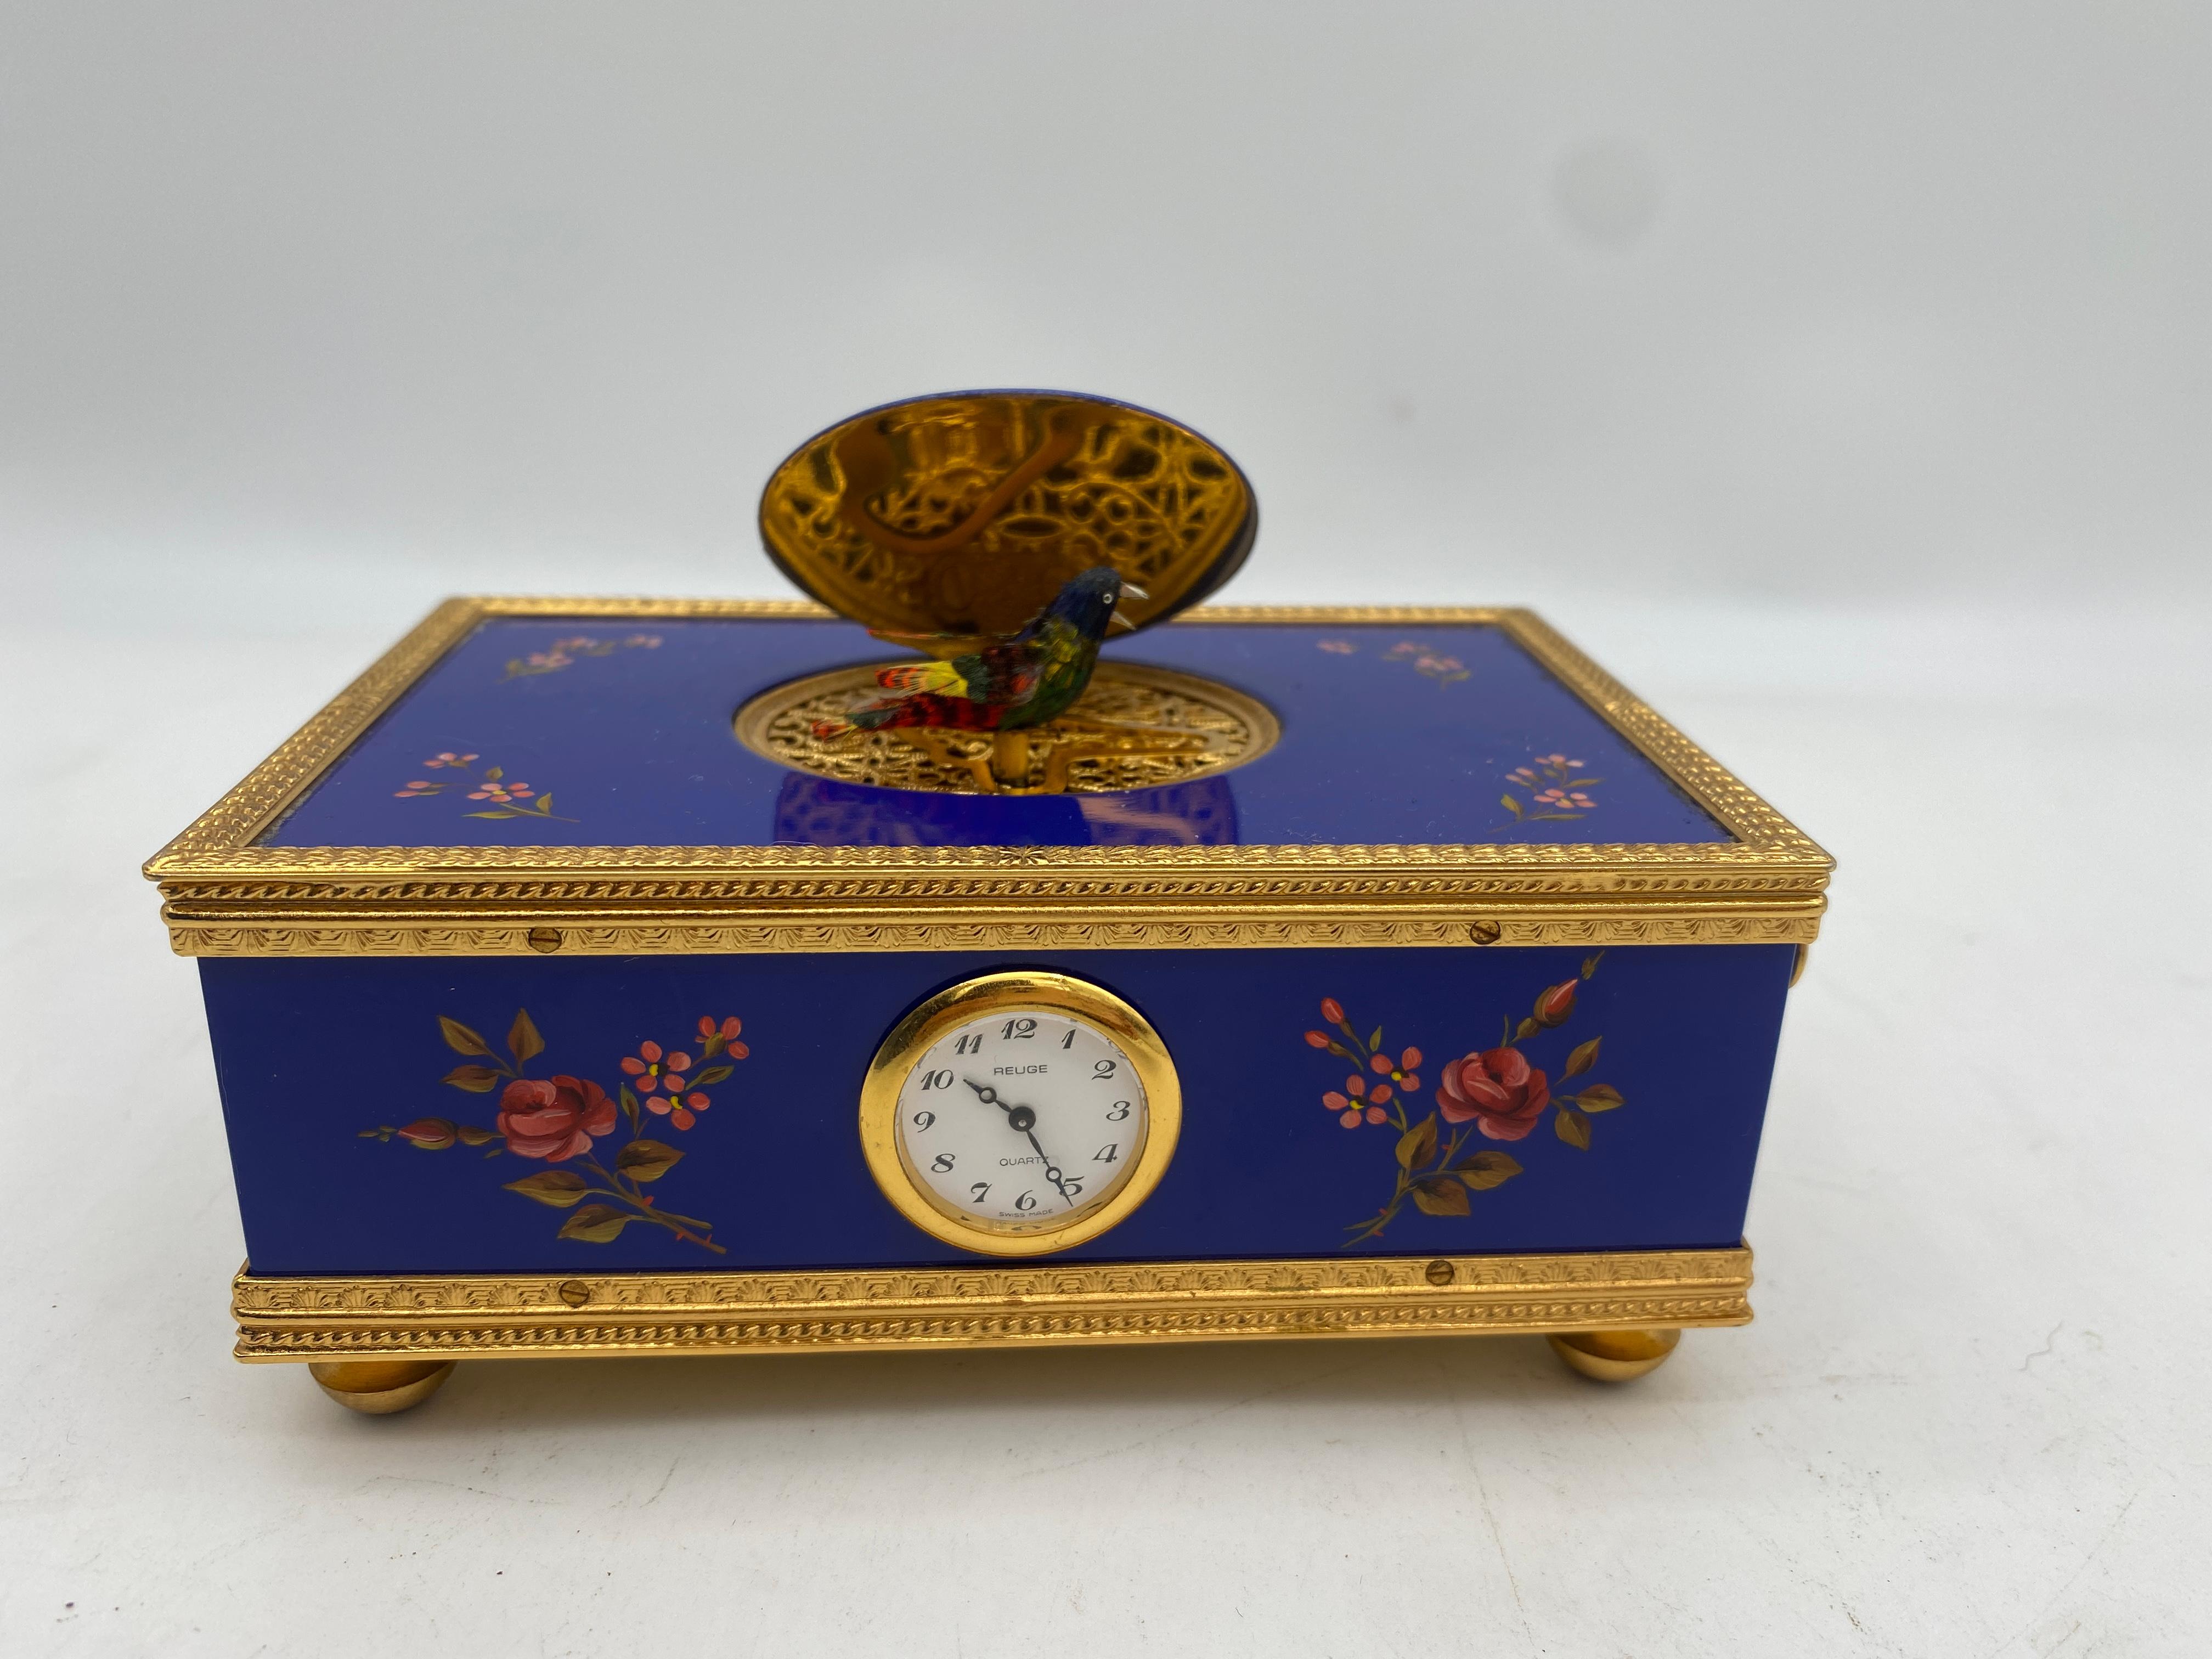 A reuge enameled music Box with Bird automaton and clock , The box with blue enamel exterior embellished with flowers and singing bird as shown in good working order. made in Switzerland
Measures 2 x 4.75 x 3.25 ''
Good working condition ,